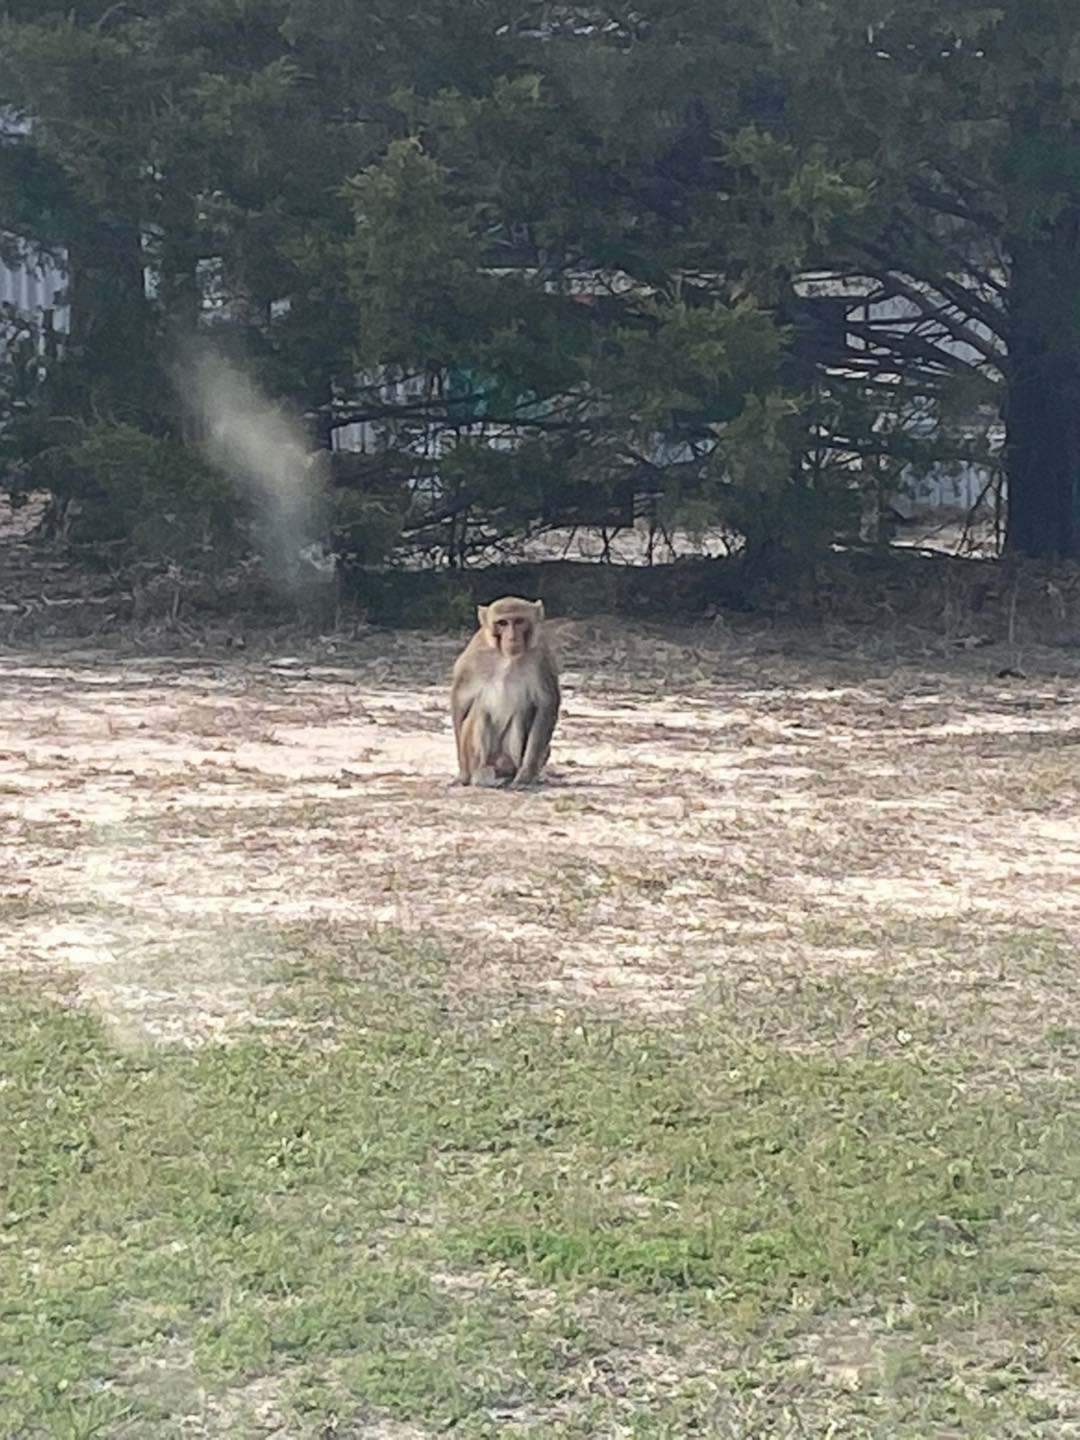 PHOTO: An investigation is underway after a monkey attacked a woman in Carter County, Oklahoma. Dickson police said they received a call about a monkey on someone's porch. When they arrived, the monkey ripped the caller's ear.